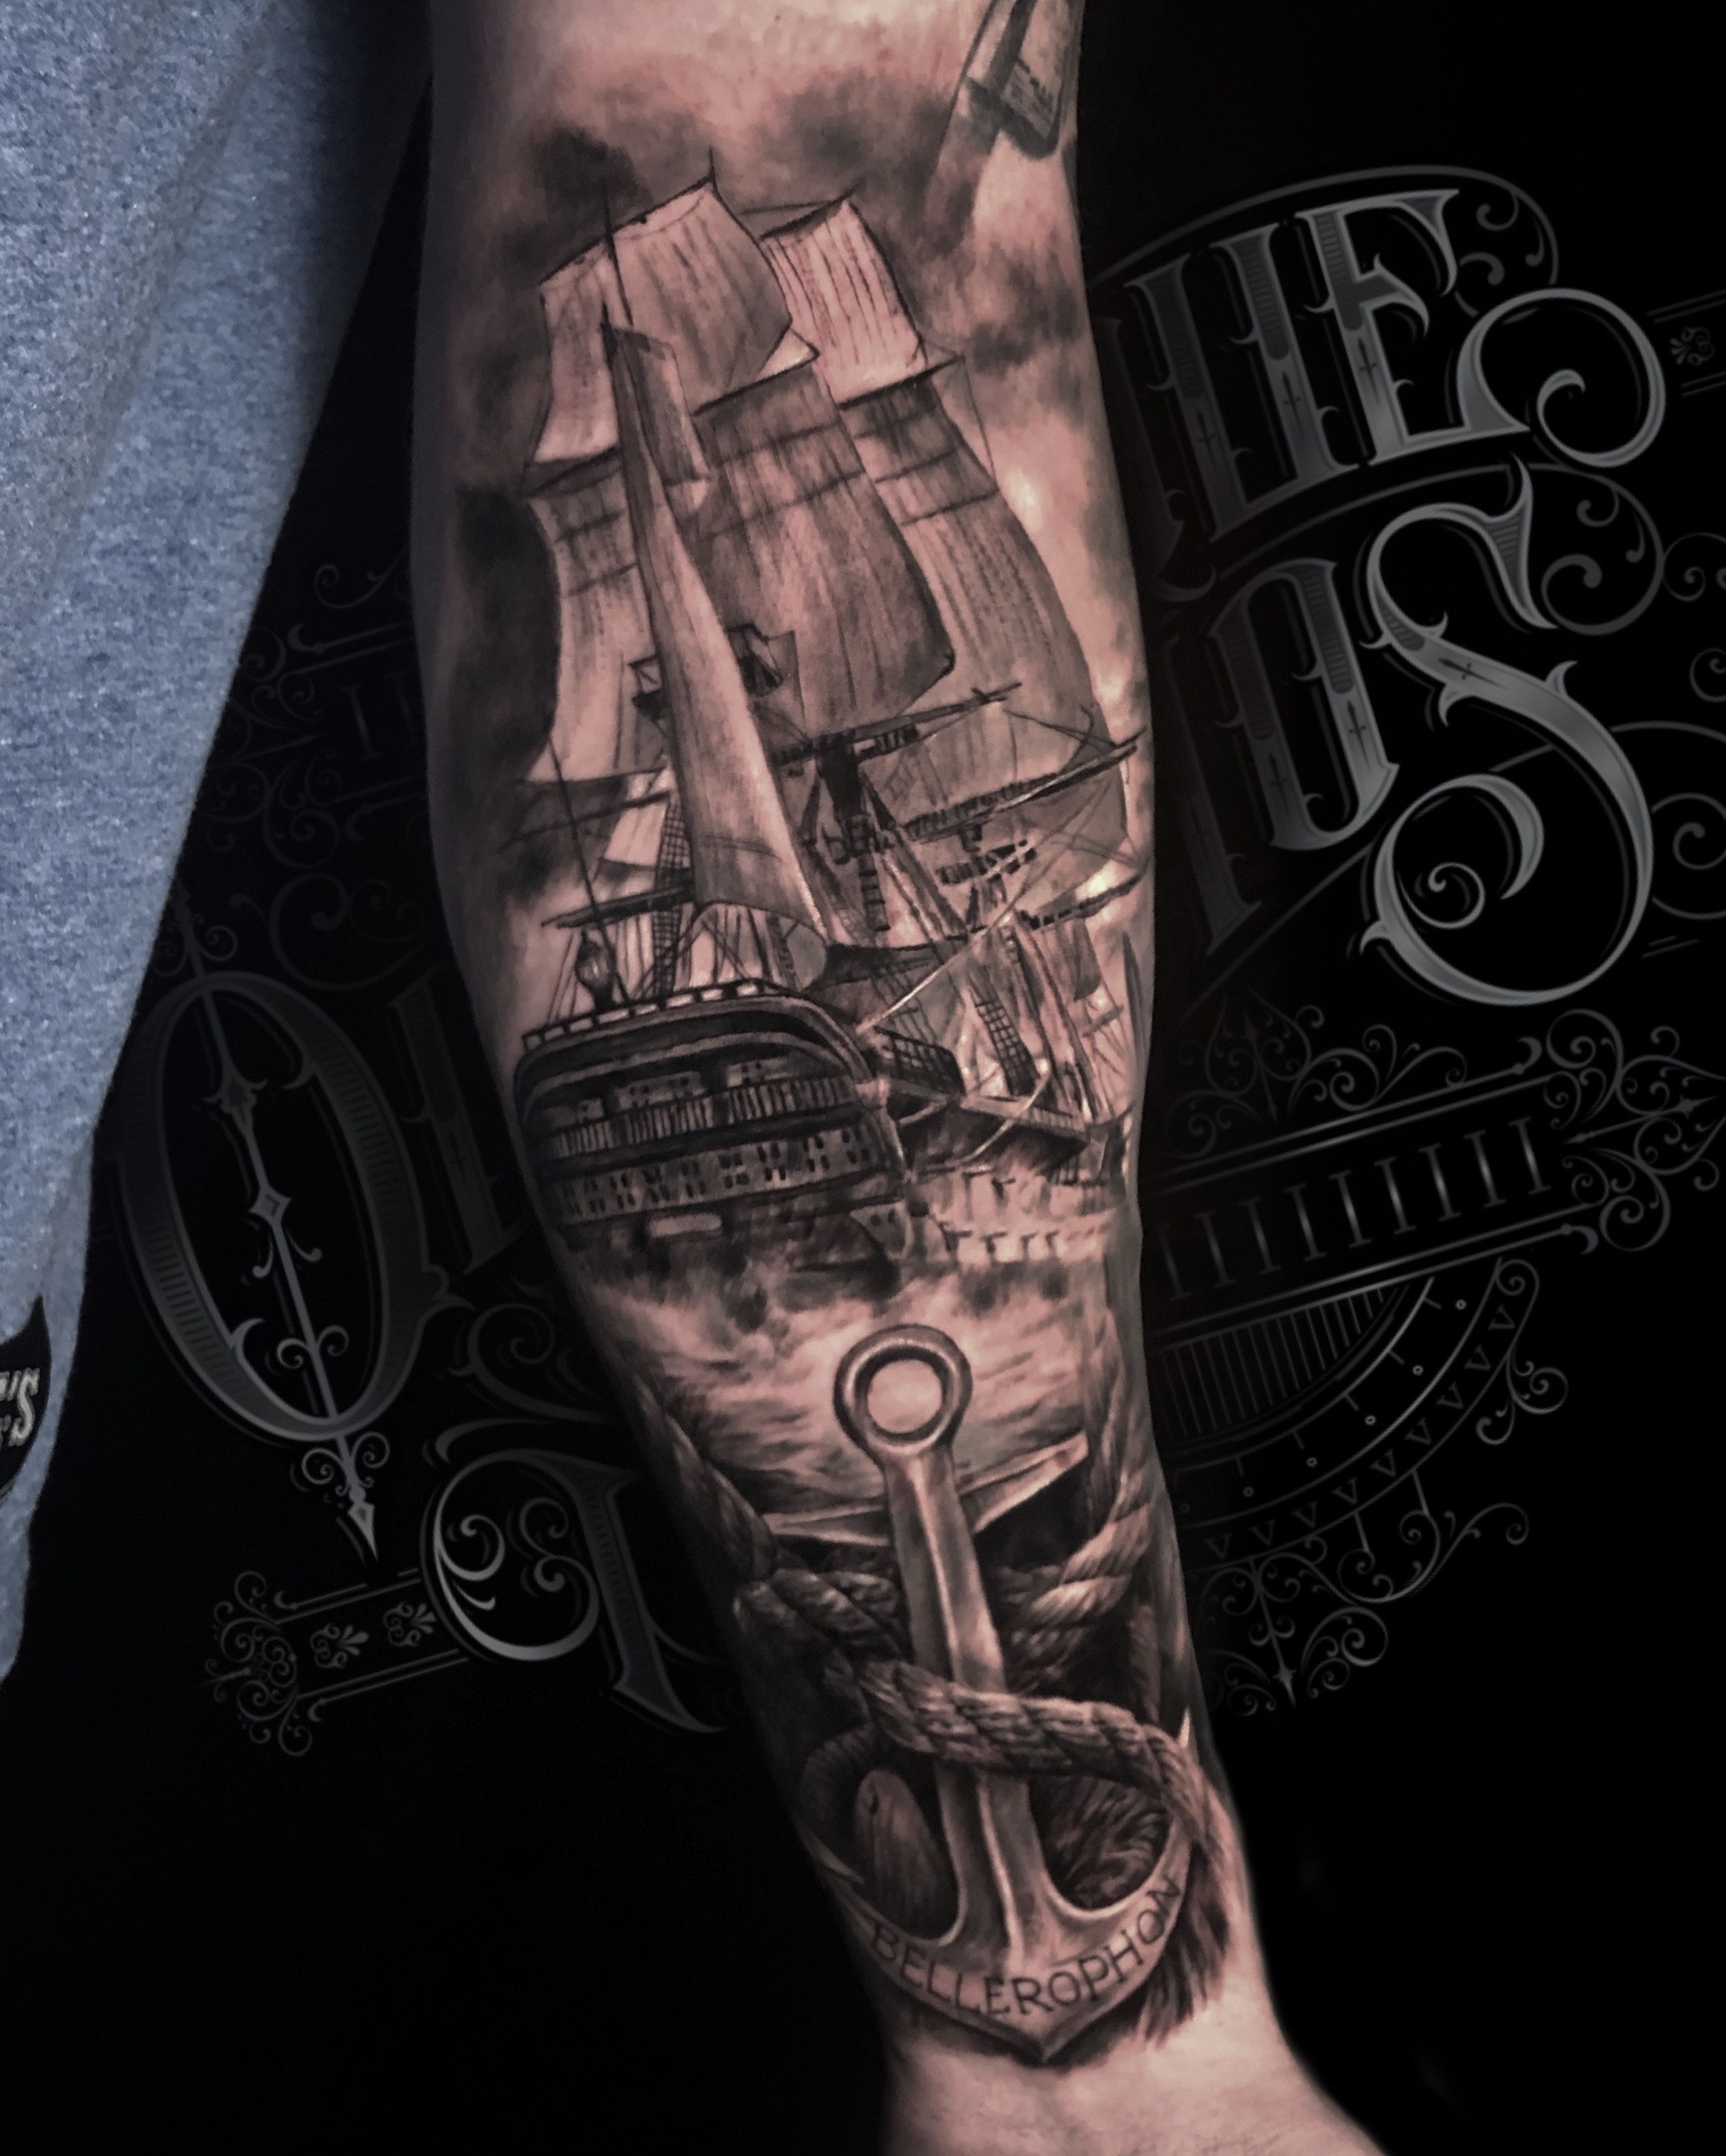 Tattoos By Tate  Sailor skull start to a nautical leg sleeve tattooed  today on applefield of the Baltimore Ravens legacytattooandartgallery  hustlebutterdeluxe electrumstencilproducts inkmaster allegoryink  247inkmag nautical nauticaltattoos 